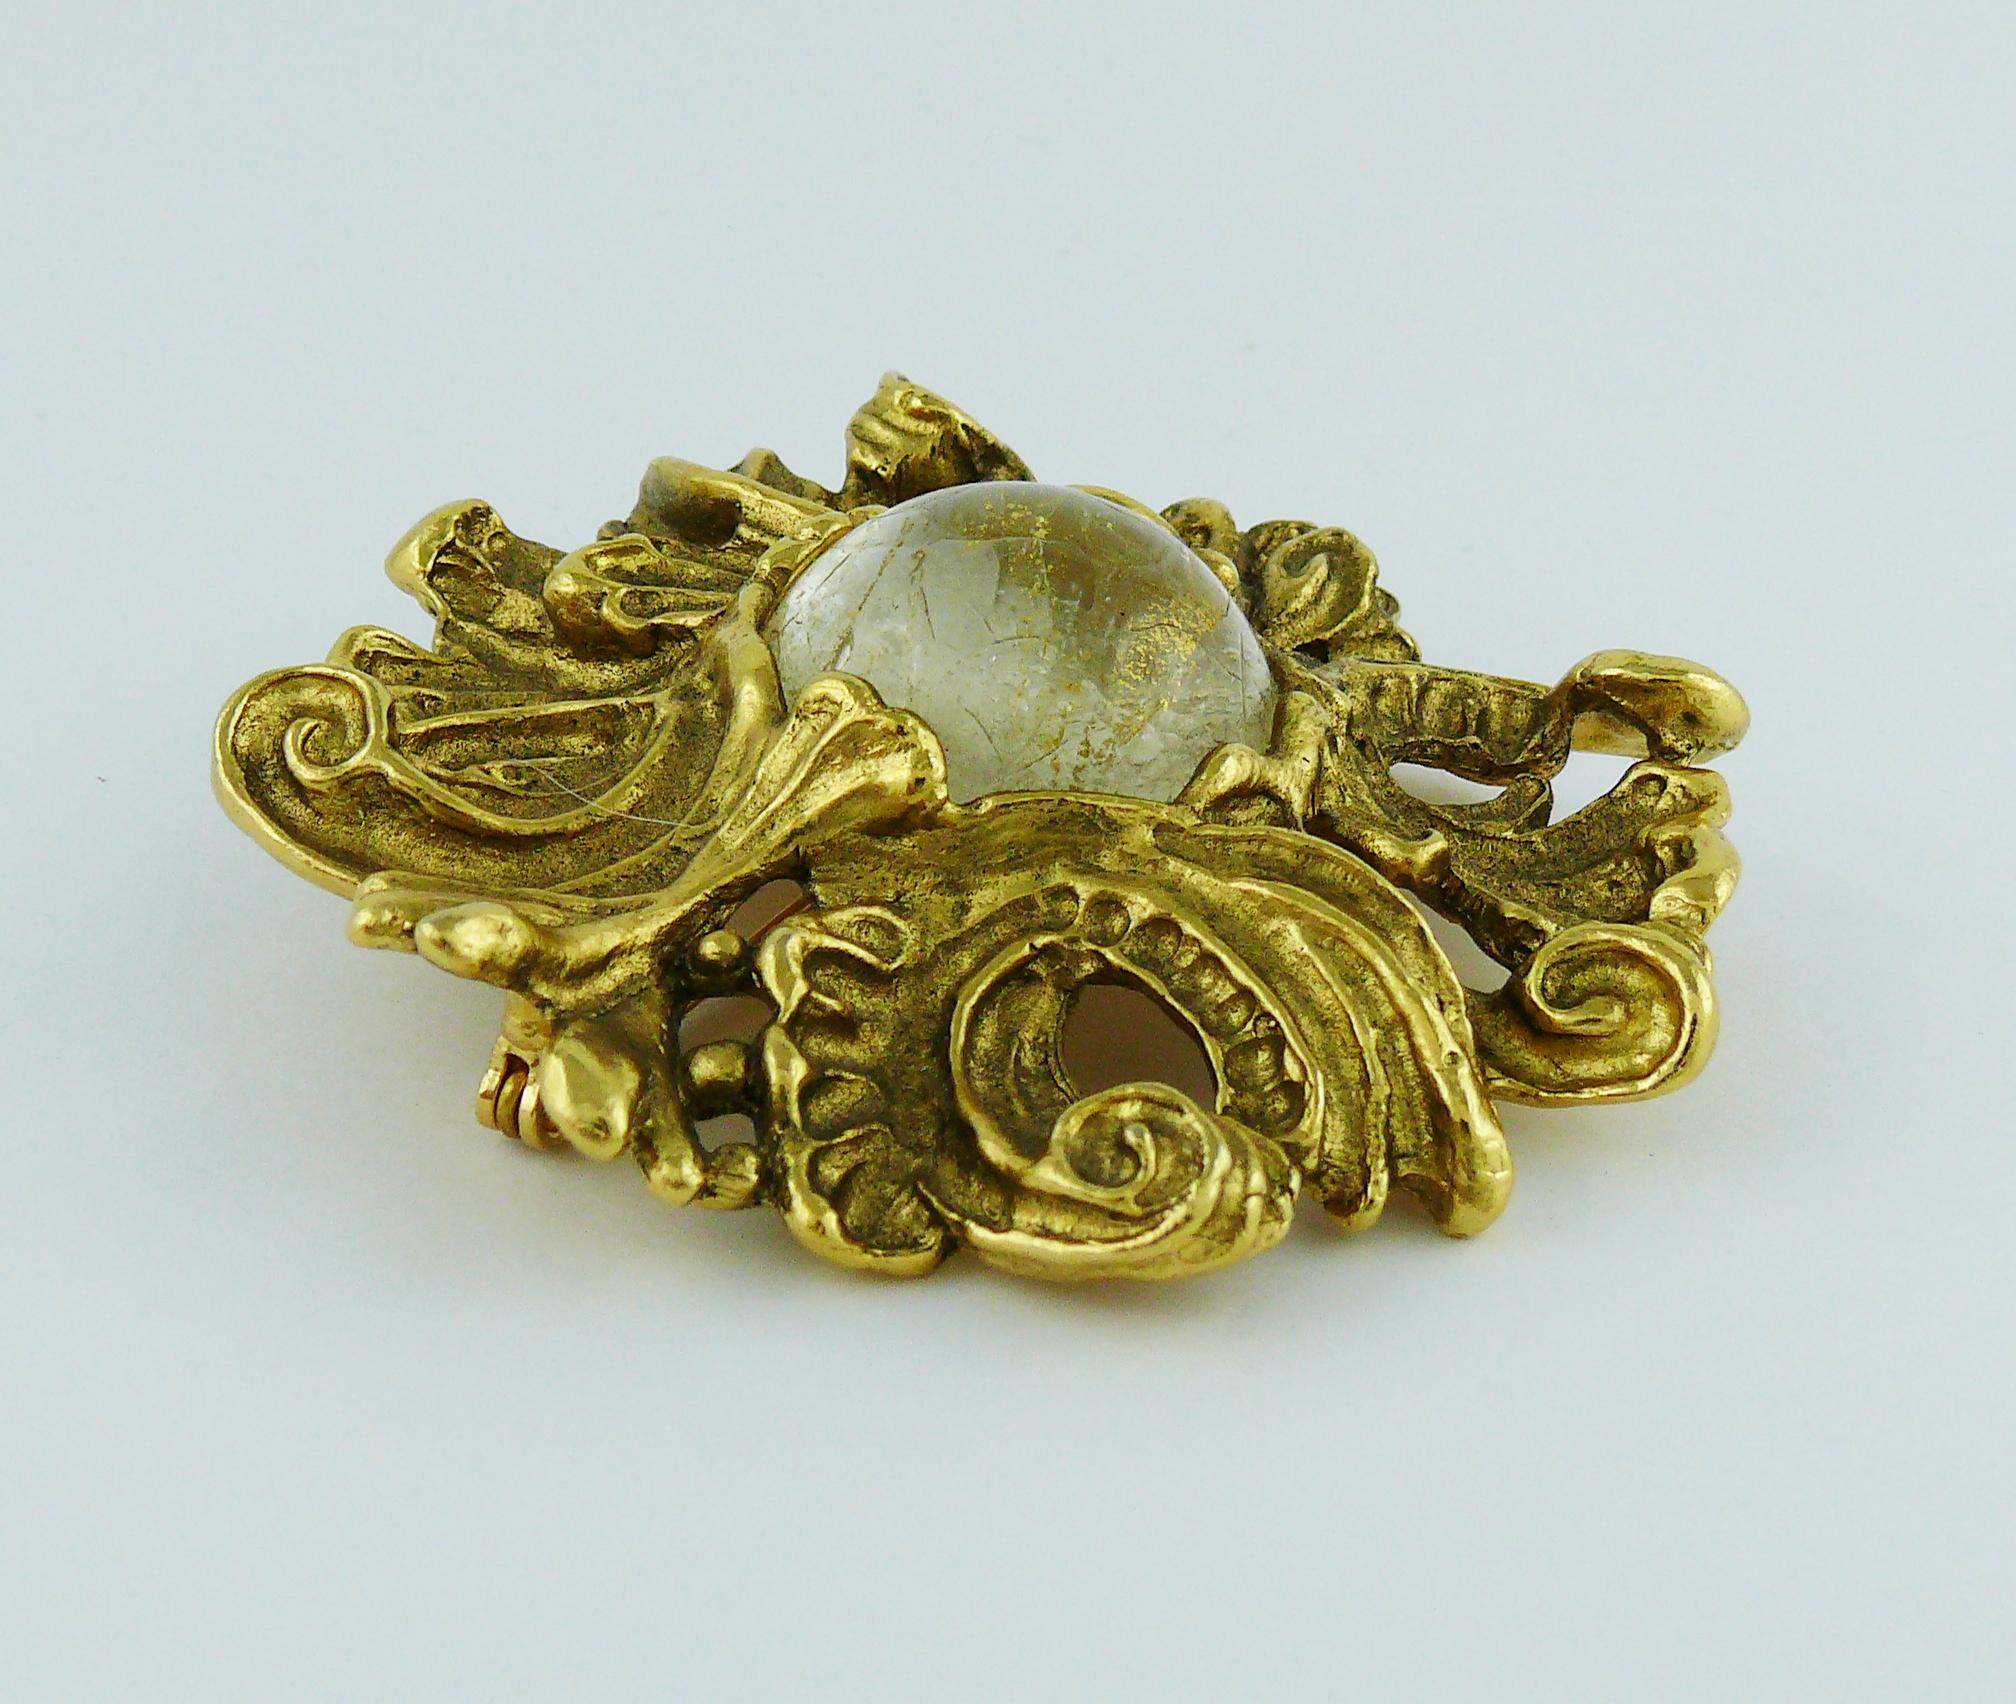 CHRISTIAN DIOR vintage antiqued gold tone Baroque brooch/pendant featuring a clear glass cabochon center with gilt inclusions and surface crack lines.

Marked CHRISTIAN DIOR Boutique.

Indicative measurements : approx. 6.7 cm (2.64 inches) x 6.9 cm